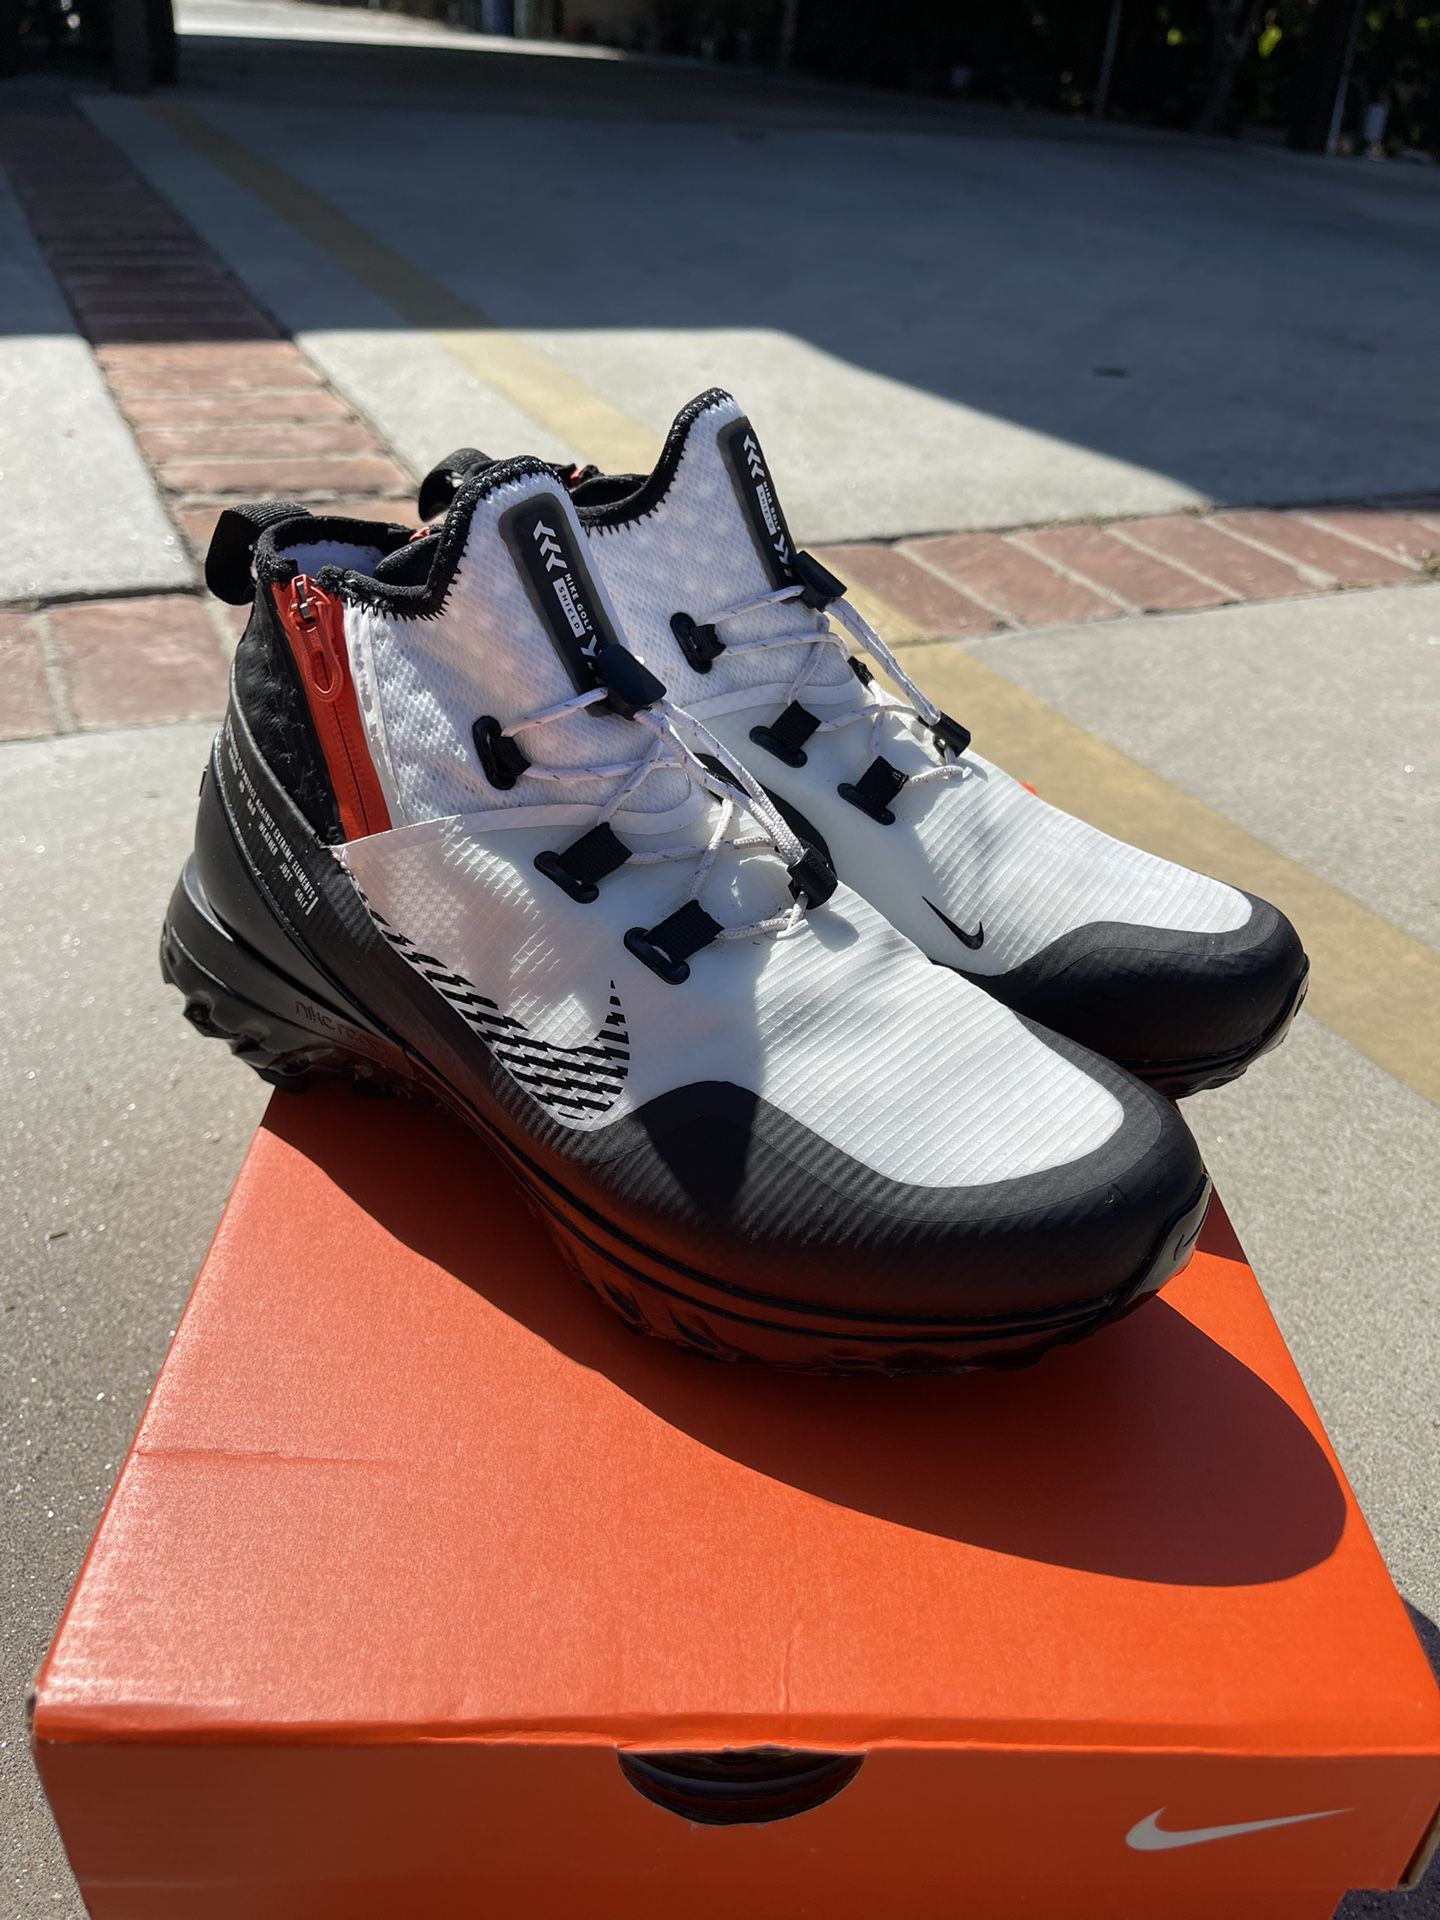 Nike Air Zoom Infinity Tour Shield Golf Shoes Sz8 for Sale in Los Angeles,  CA - OfferUp